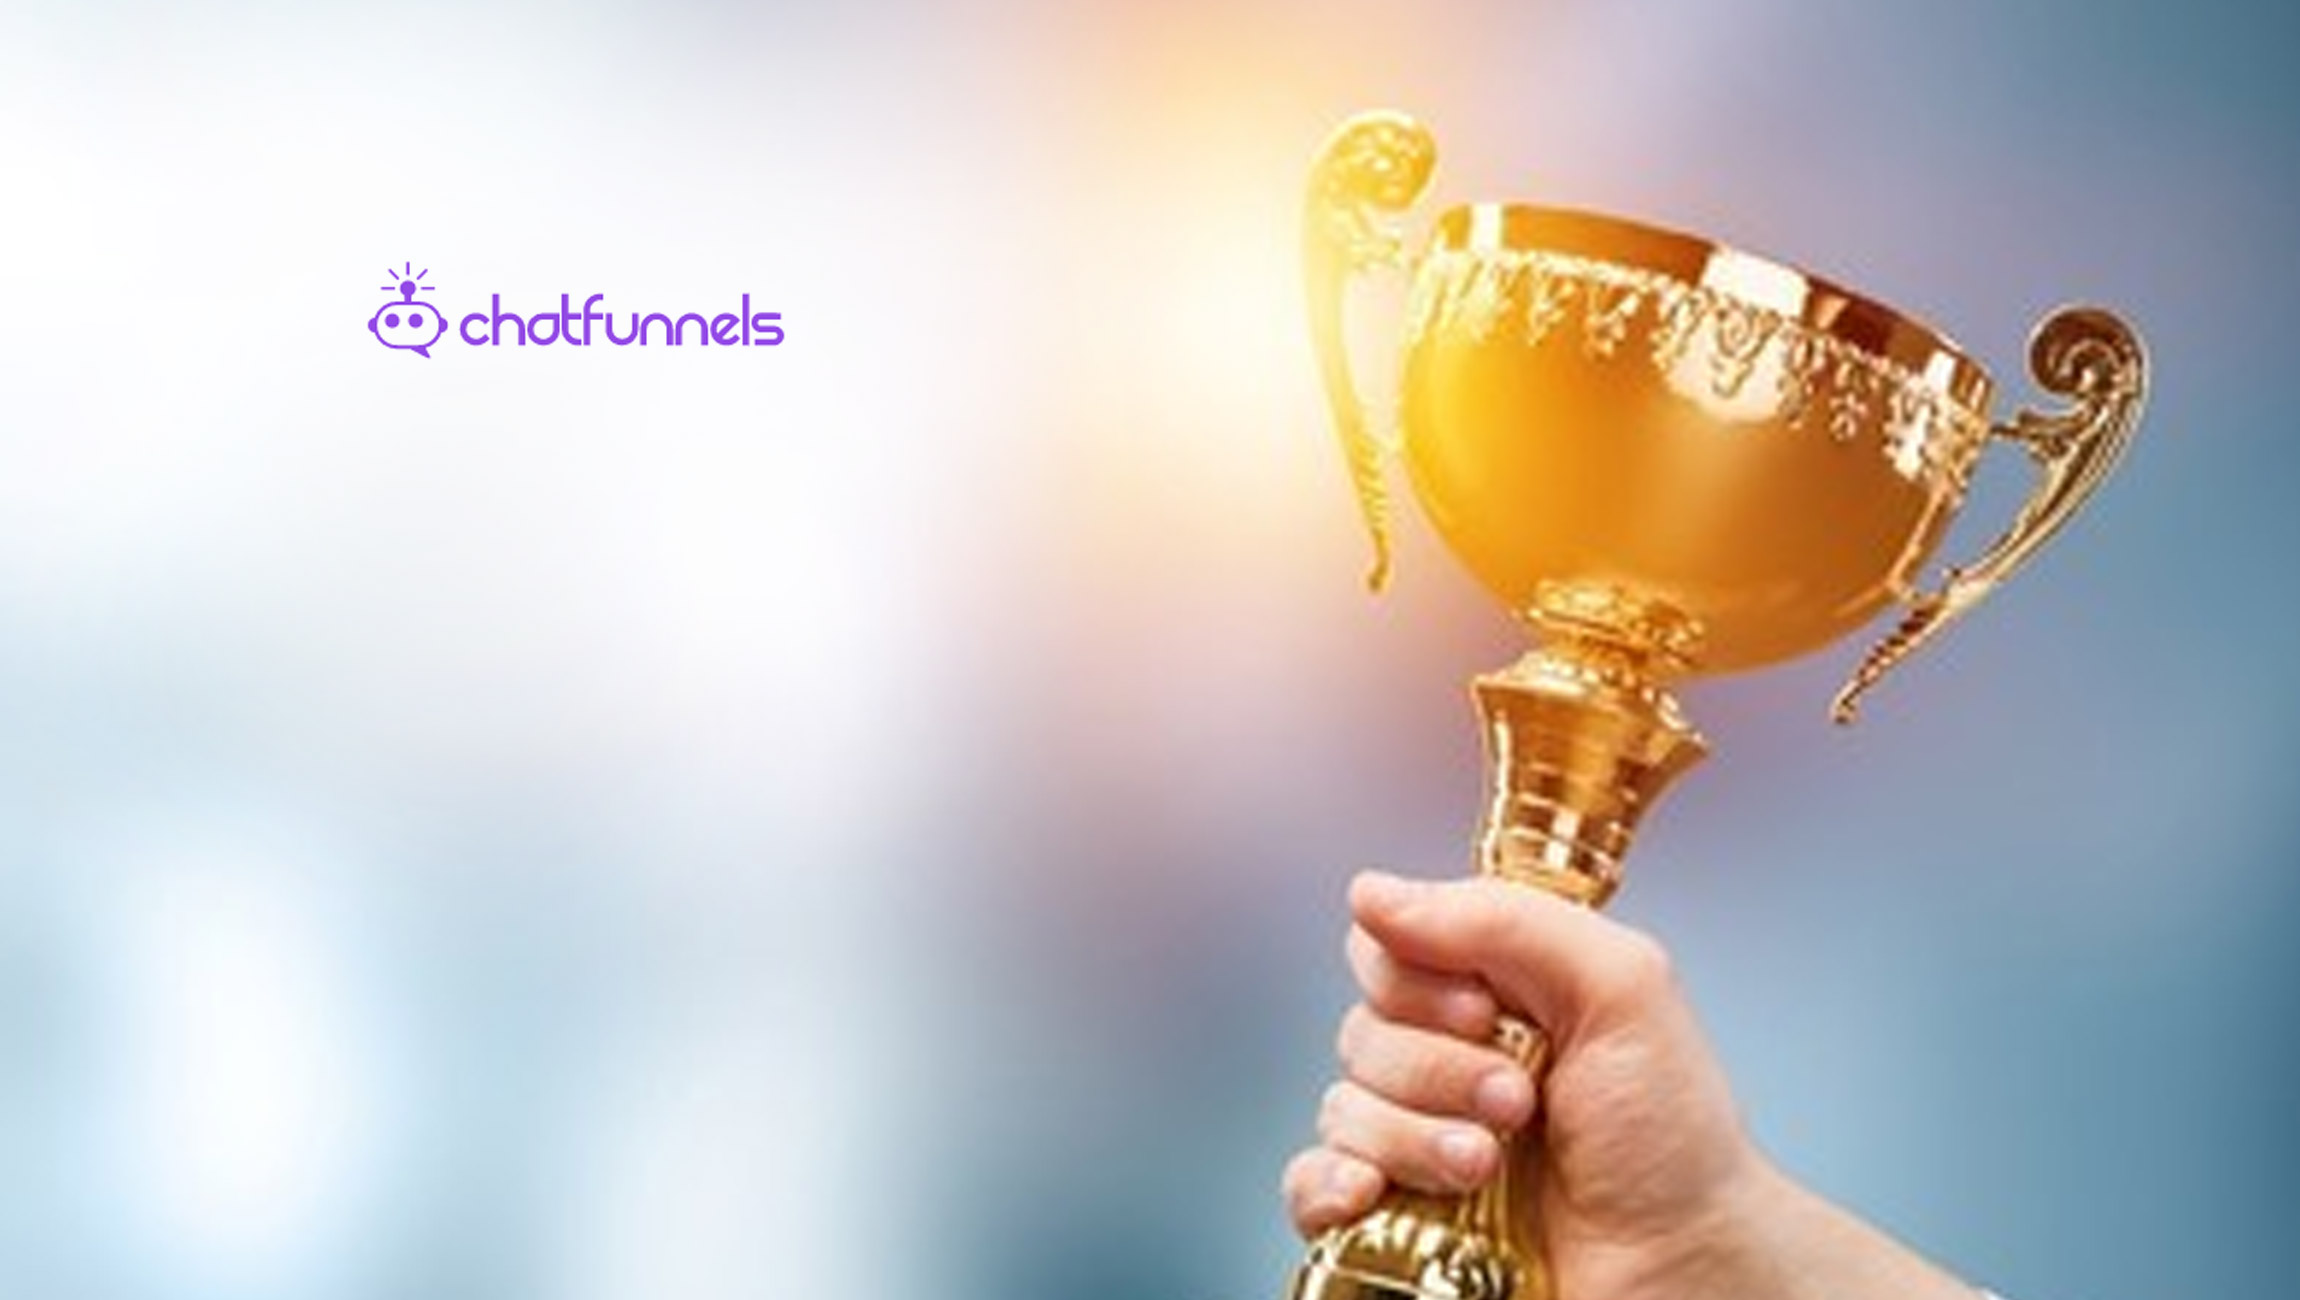 ChatFunnels Announces 12 Sales and Marketing Award Winners at Demand Gen Summit 2021